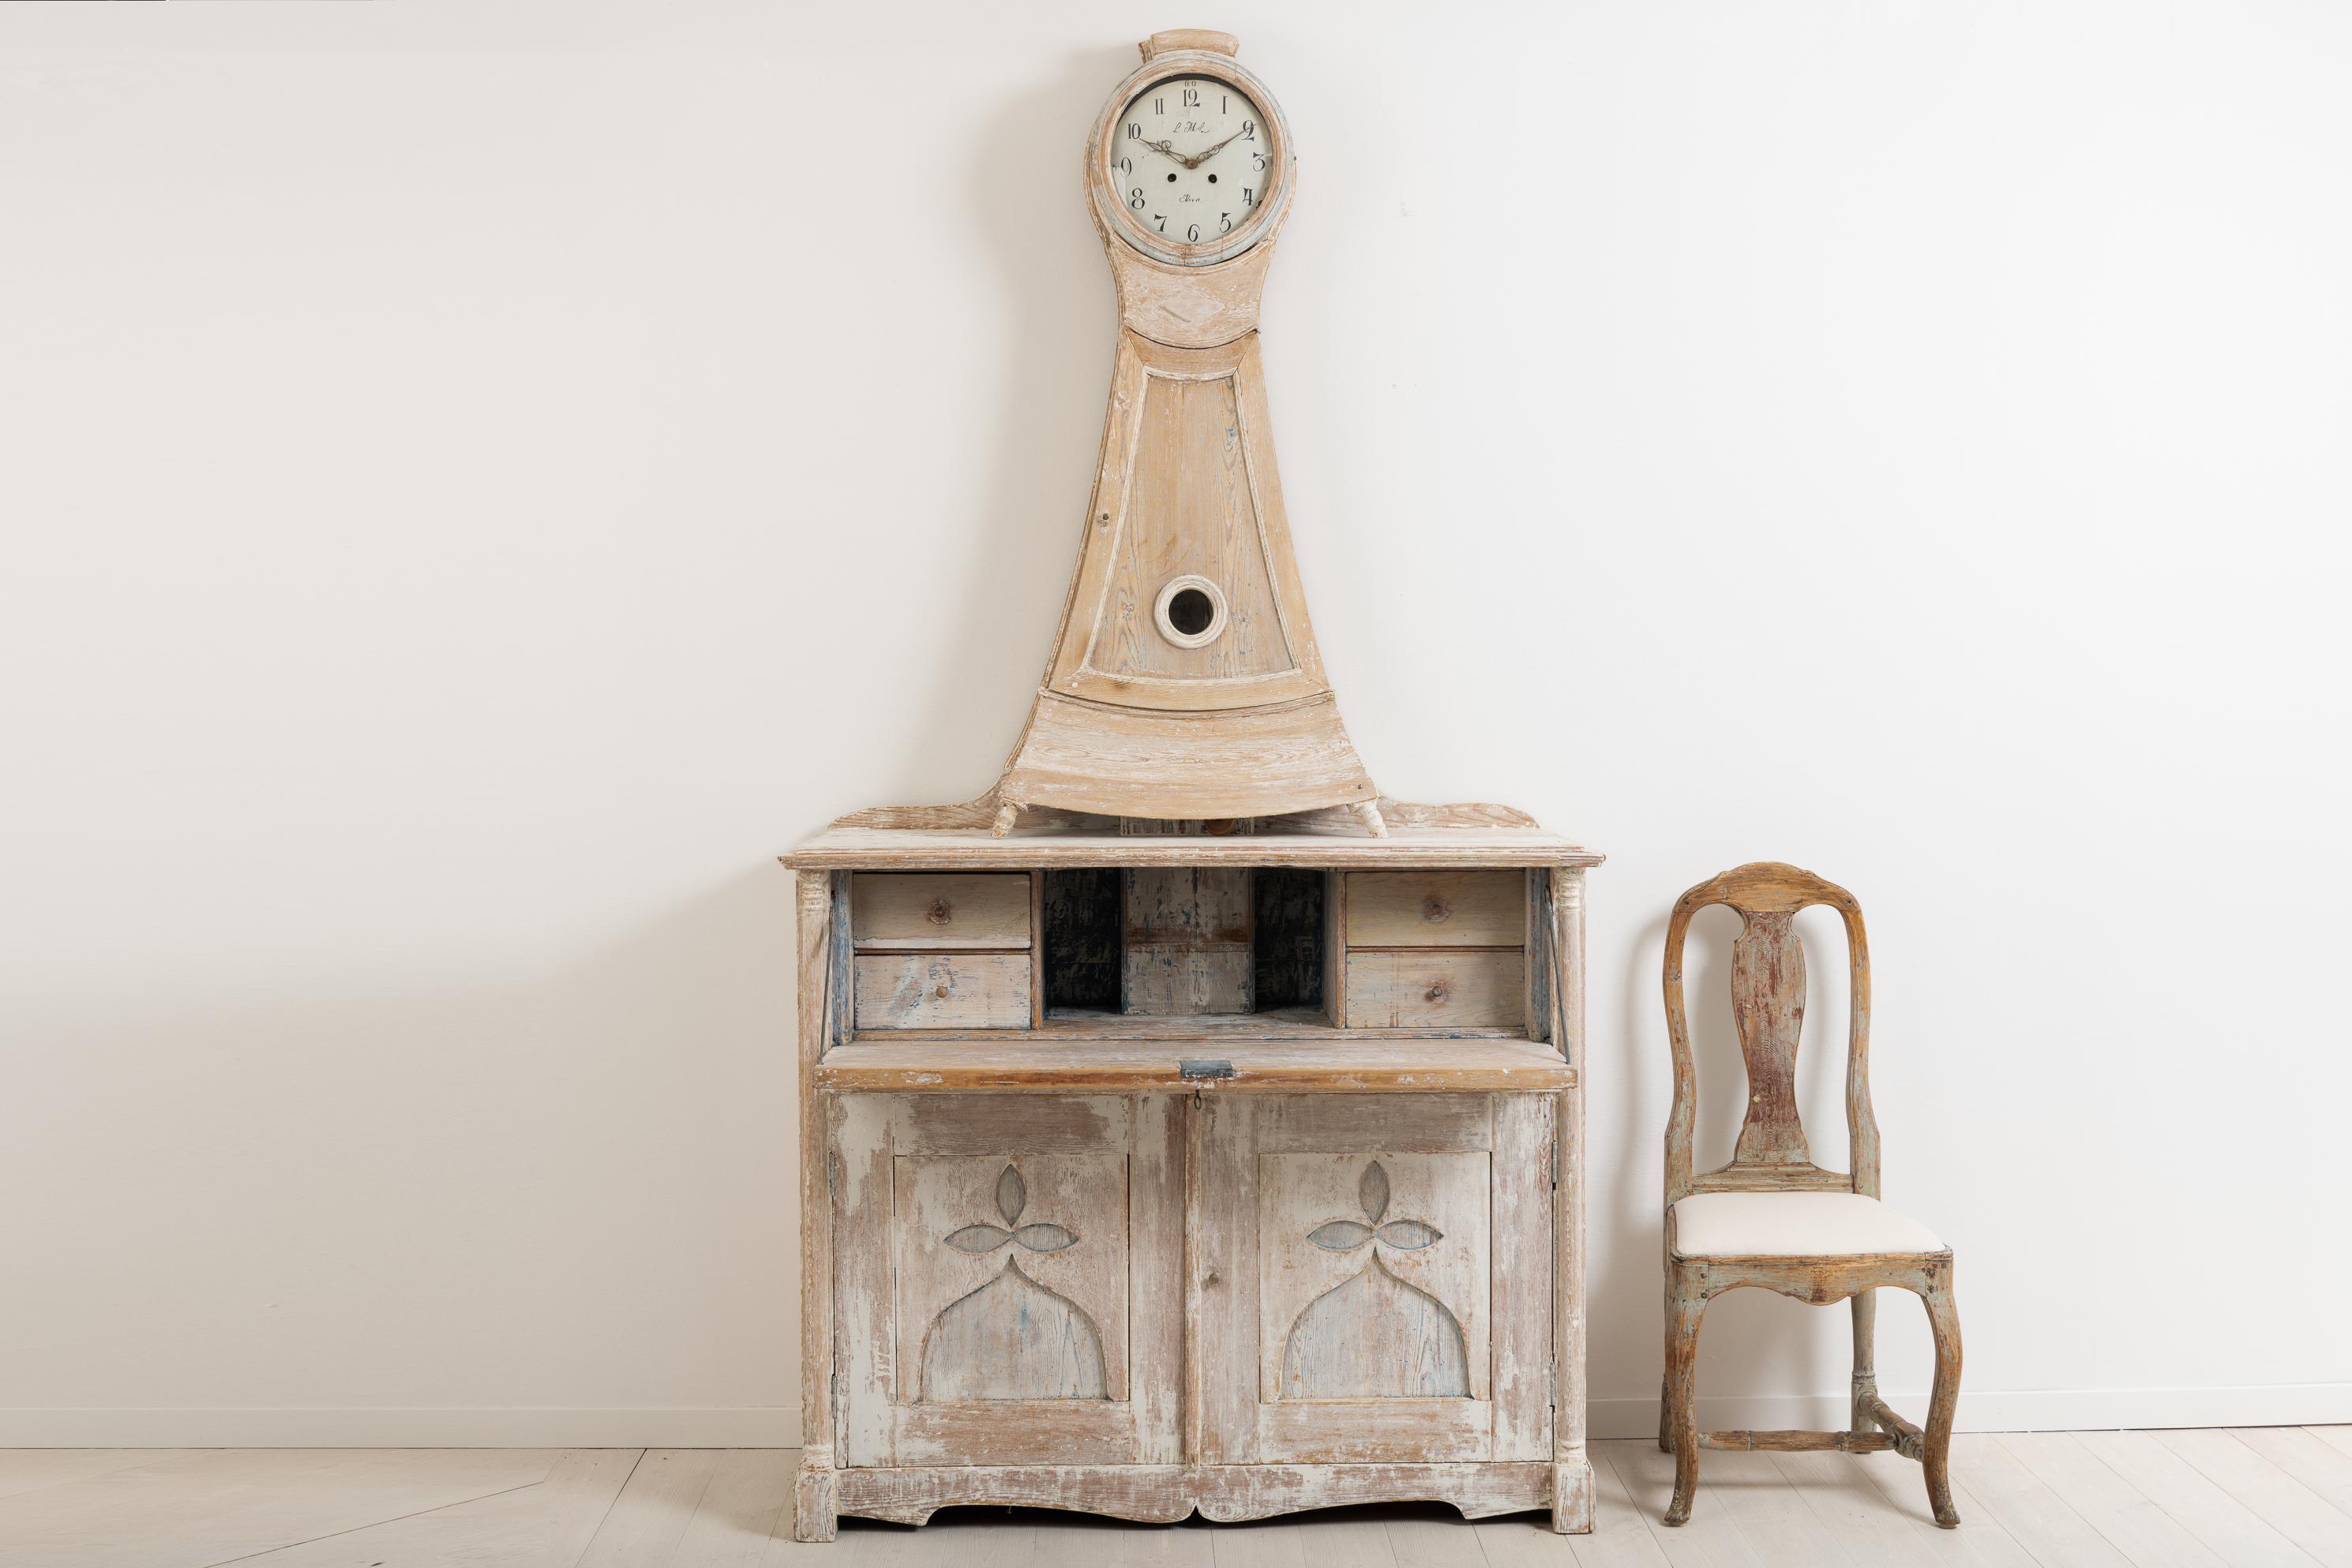 Clock cabinet with a writers flap - a secretary. Manufactured in northern Sweden around 1820 from pine. With traces of original paint. Original working lock and key in the secretary. The cabinet is in two parts. The clock mechanism was working at